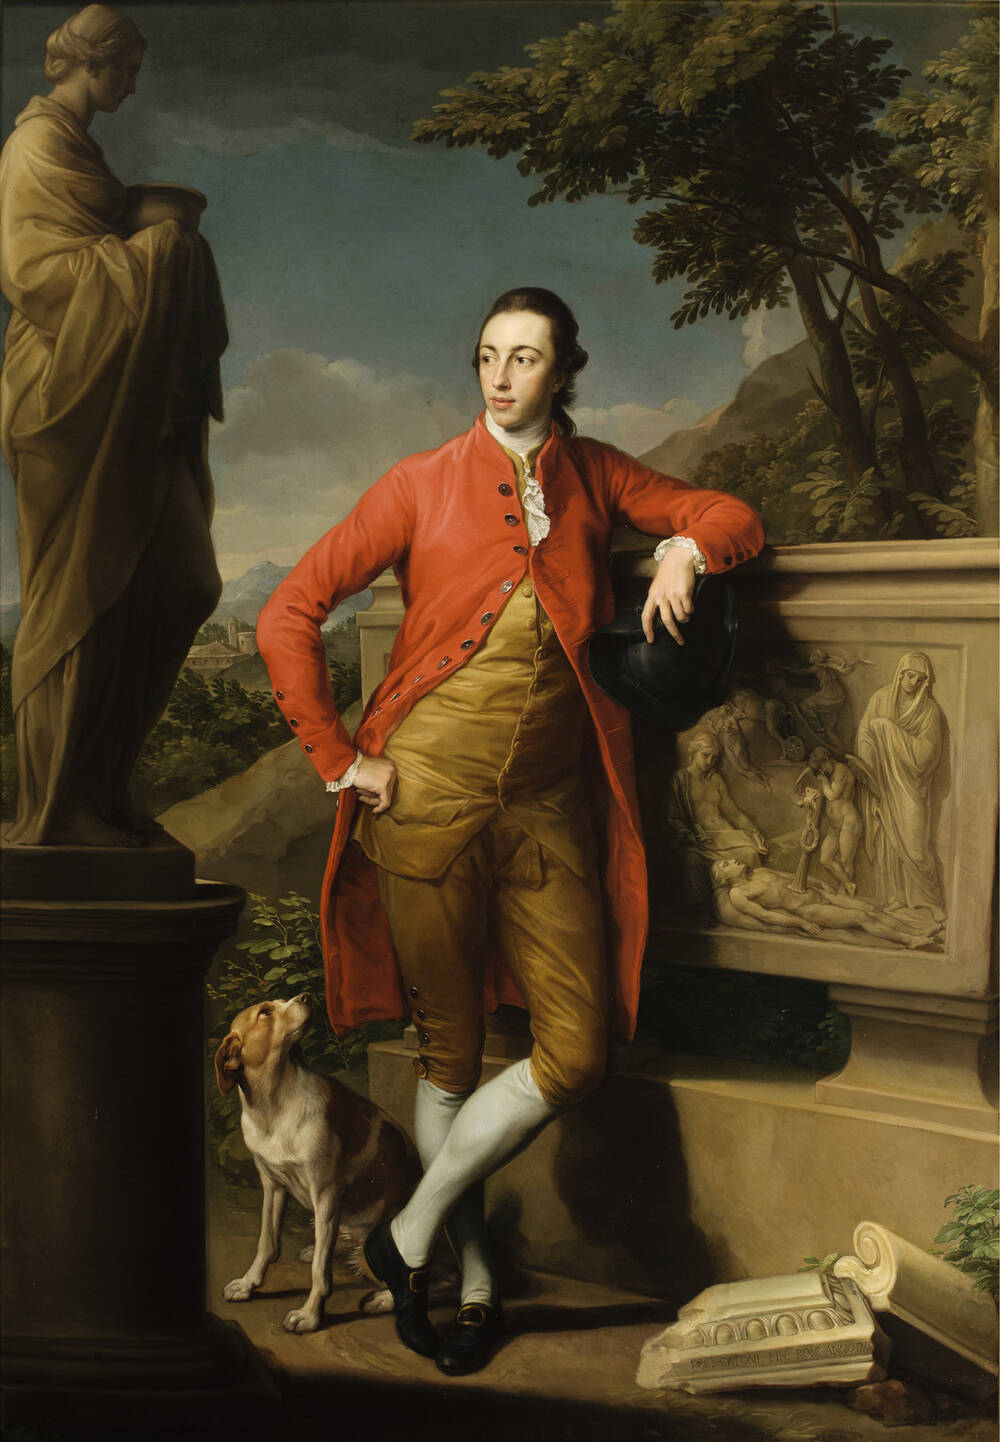 A portrait of a young well-to-do man, who stands against a classical backdrop with a dog sitting at his feet. He wears a three-quarter red coat and has his legs crossed in an informal style.